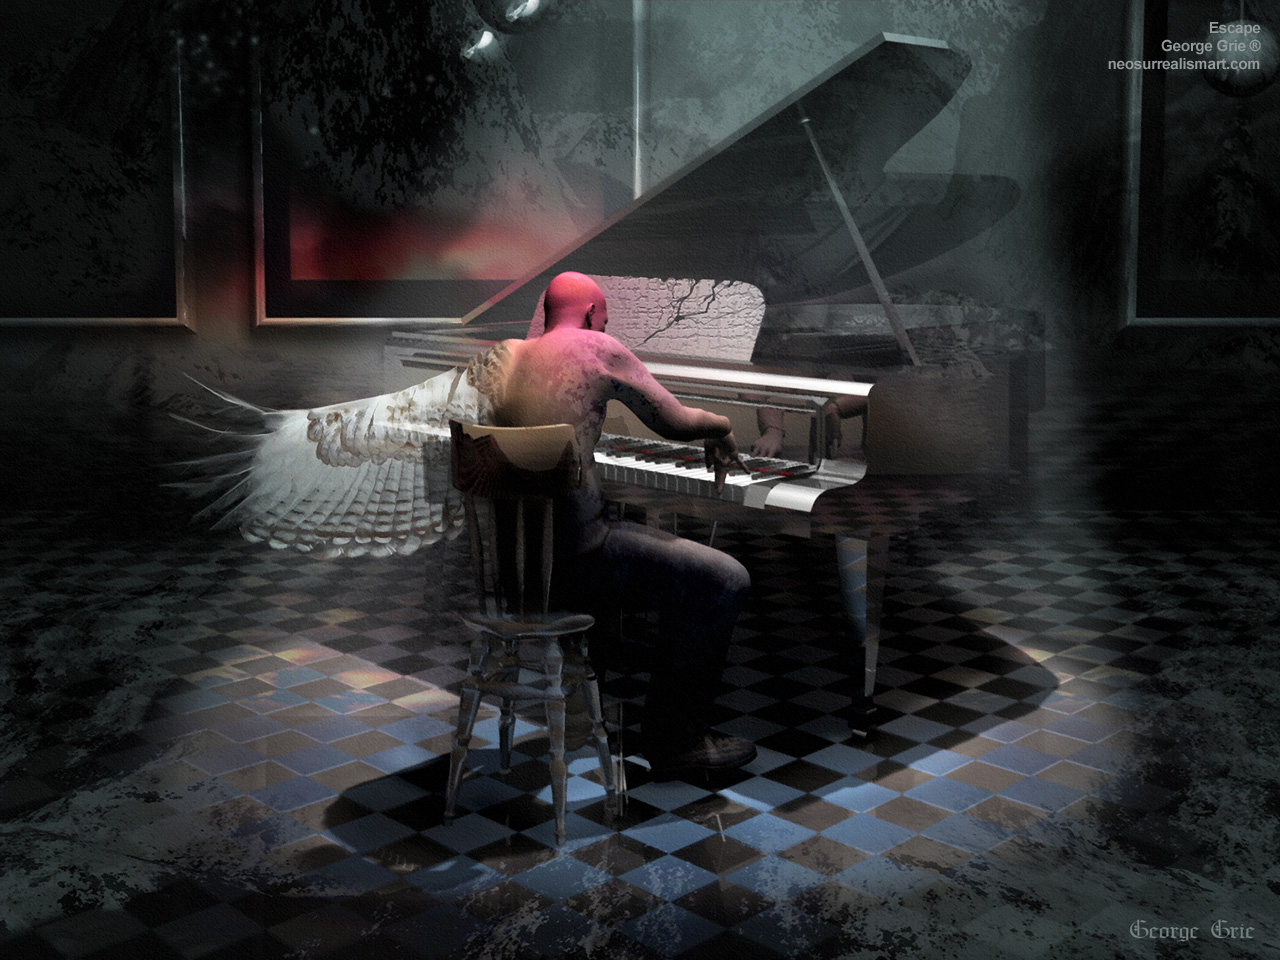 modern surrealism painting, contemporary surrealist graphic drawing, Modern art surrealism poster, print, wallpaper: Limited Edition Prints Escape Before Dawn. Artist certified signed limited edition archival Giclée prints. background, piano, wing, flying, music, pianist, chair, spotlight, red, concept, conceptual, cult, illustration, isolated, old, render, rendered, rendering, retro, scene, studio. artist, audio, chord, classical, close, create, creation, creative, creator, detail, ebony, entertainment, fingers, hand, harmony, hit, instrument, isolated, ivory, key, keyboard, learn, melodic, melody, music, musical, musician, note, notes, perform, performing, piano, play, player, practice, practicing, press, rhythm, shadow, shiny, song, sound, strike, tune,  